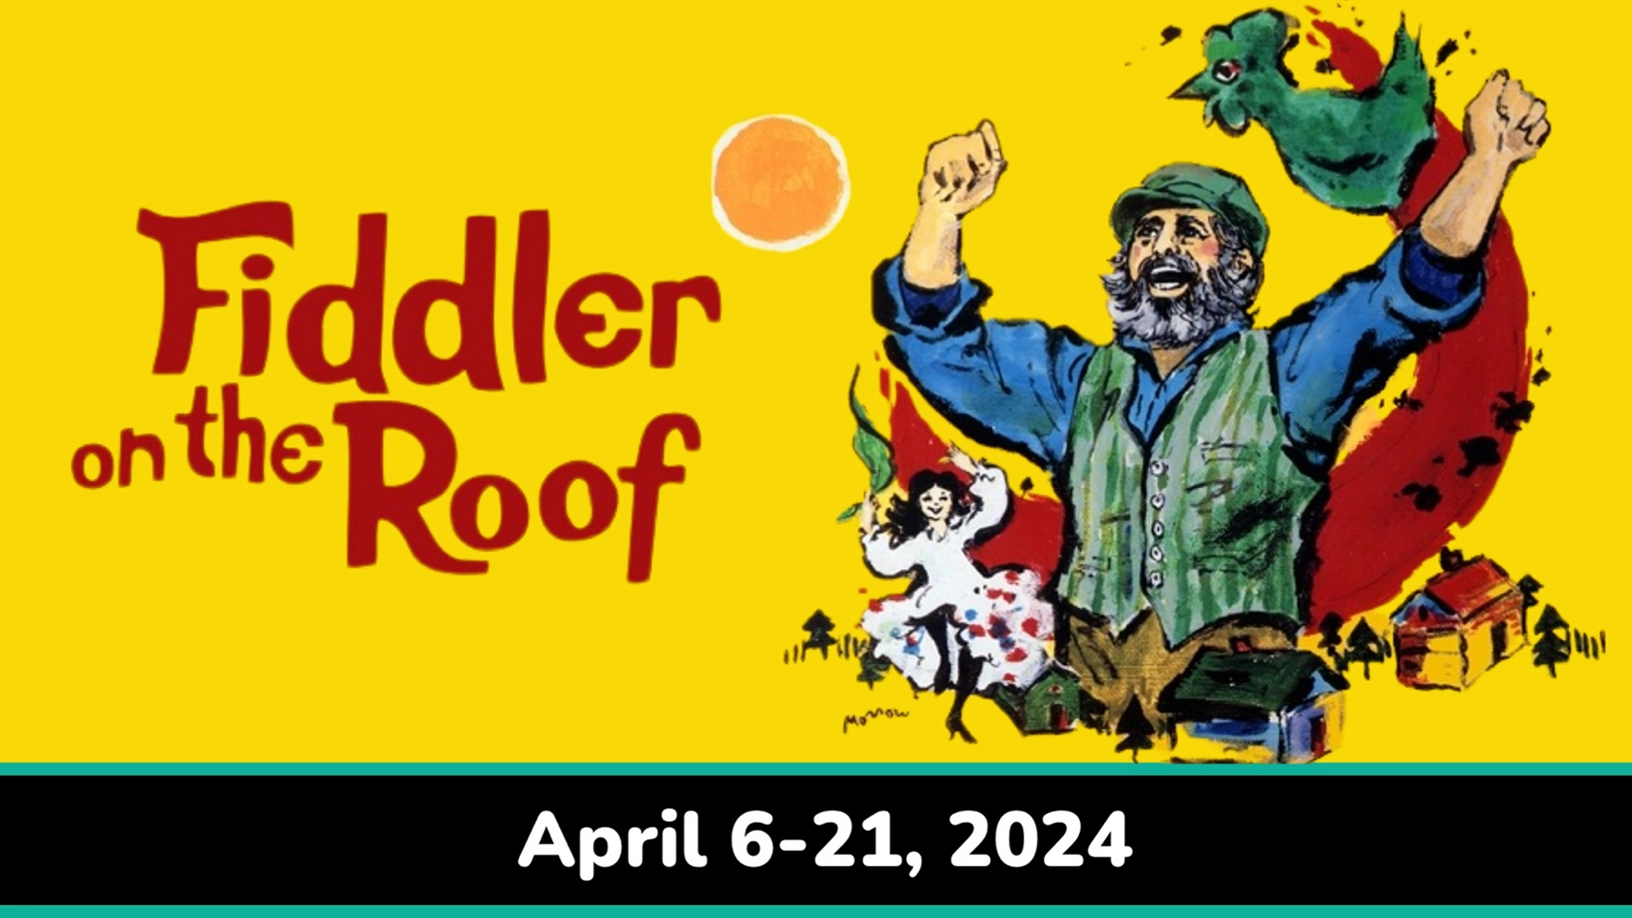 Algonquin Arts Theatre Announces Casting and Creative Team for Fiddler on the Roof